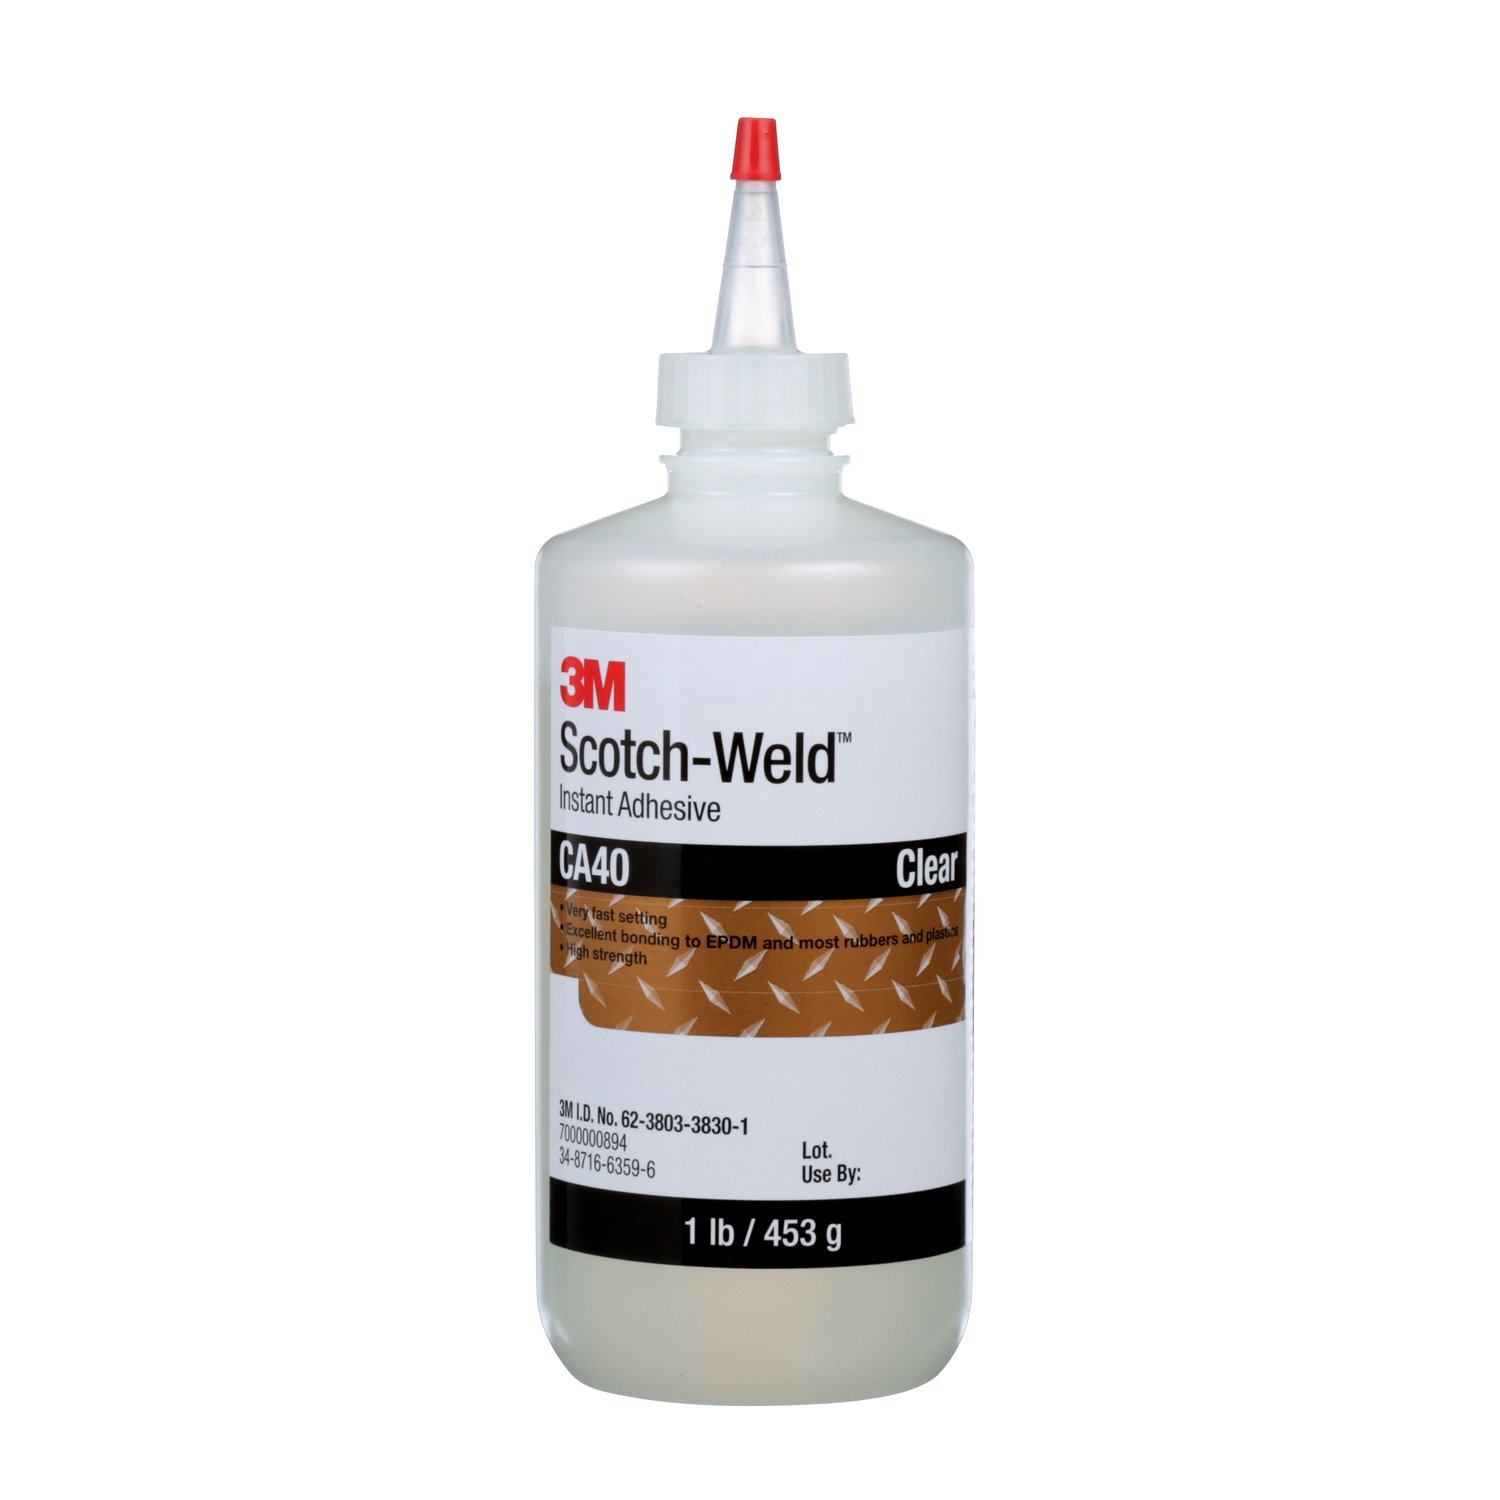 7000000894 - 3M Scotch-Weld Instant Adhesive CA40, Clear, 1 Pound, 1 Bottle/Case